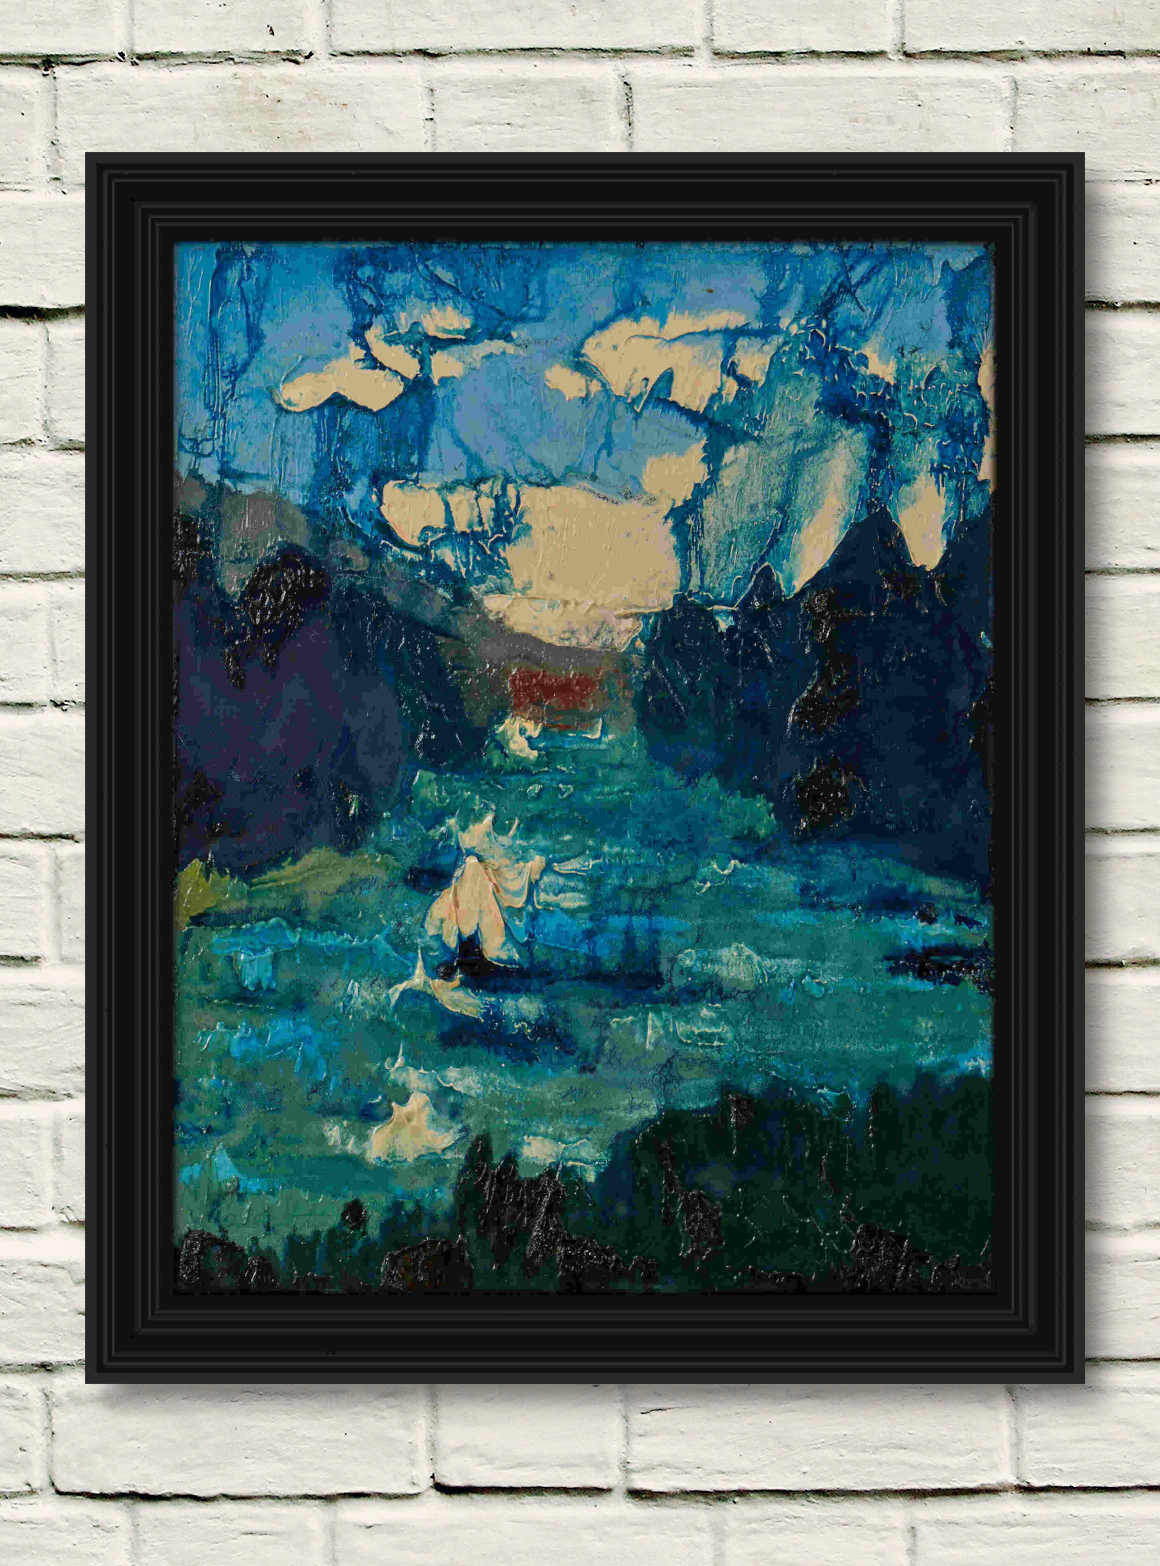 artist rod coyne's landscape painting "The Meetings" is shown here, in a black frame on a white wall.